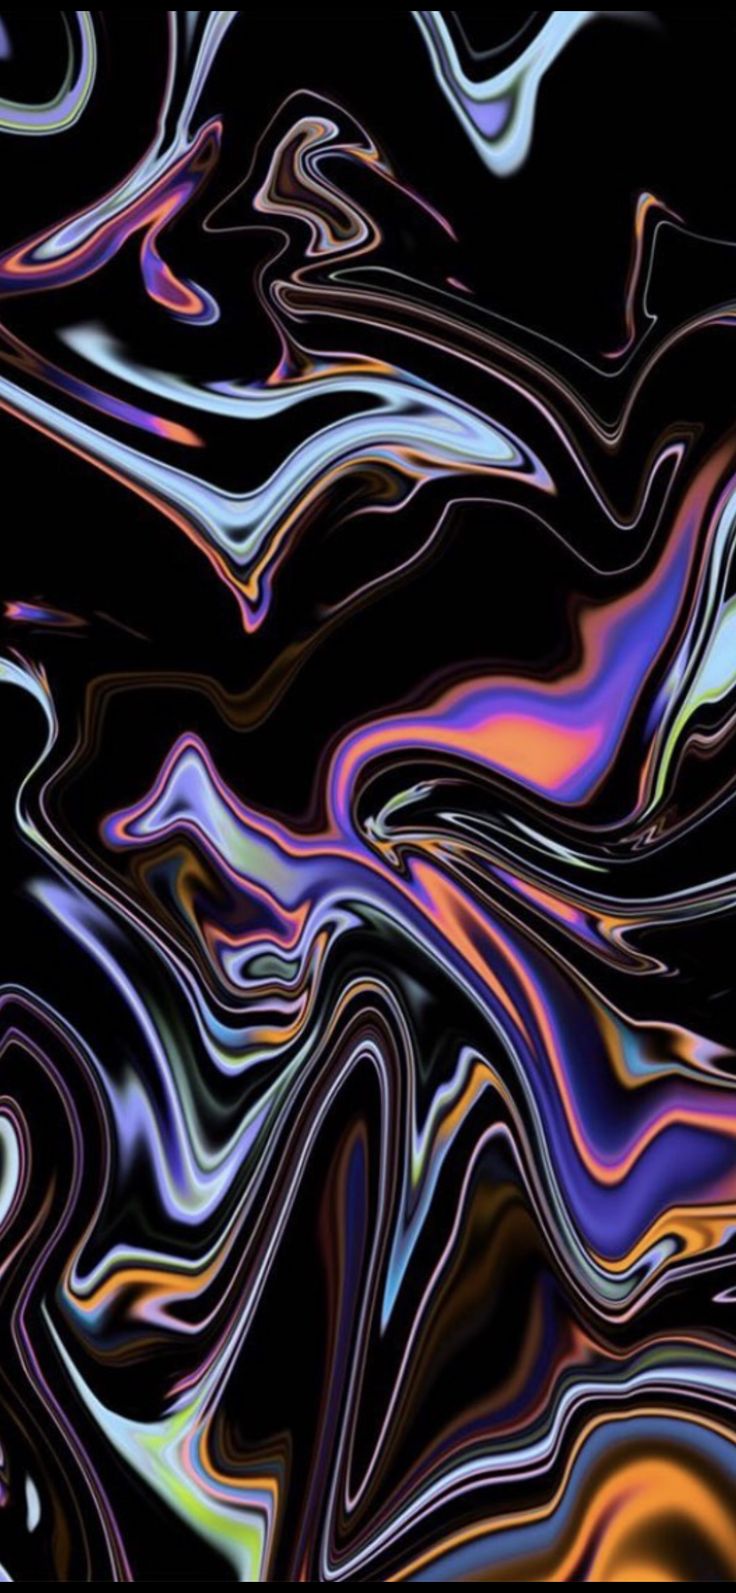 an abstract background with multicolored lines and swirls in black, blue, pink, yellow and orange